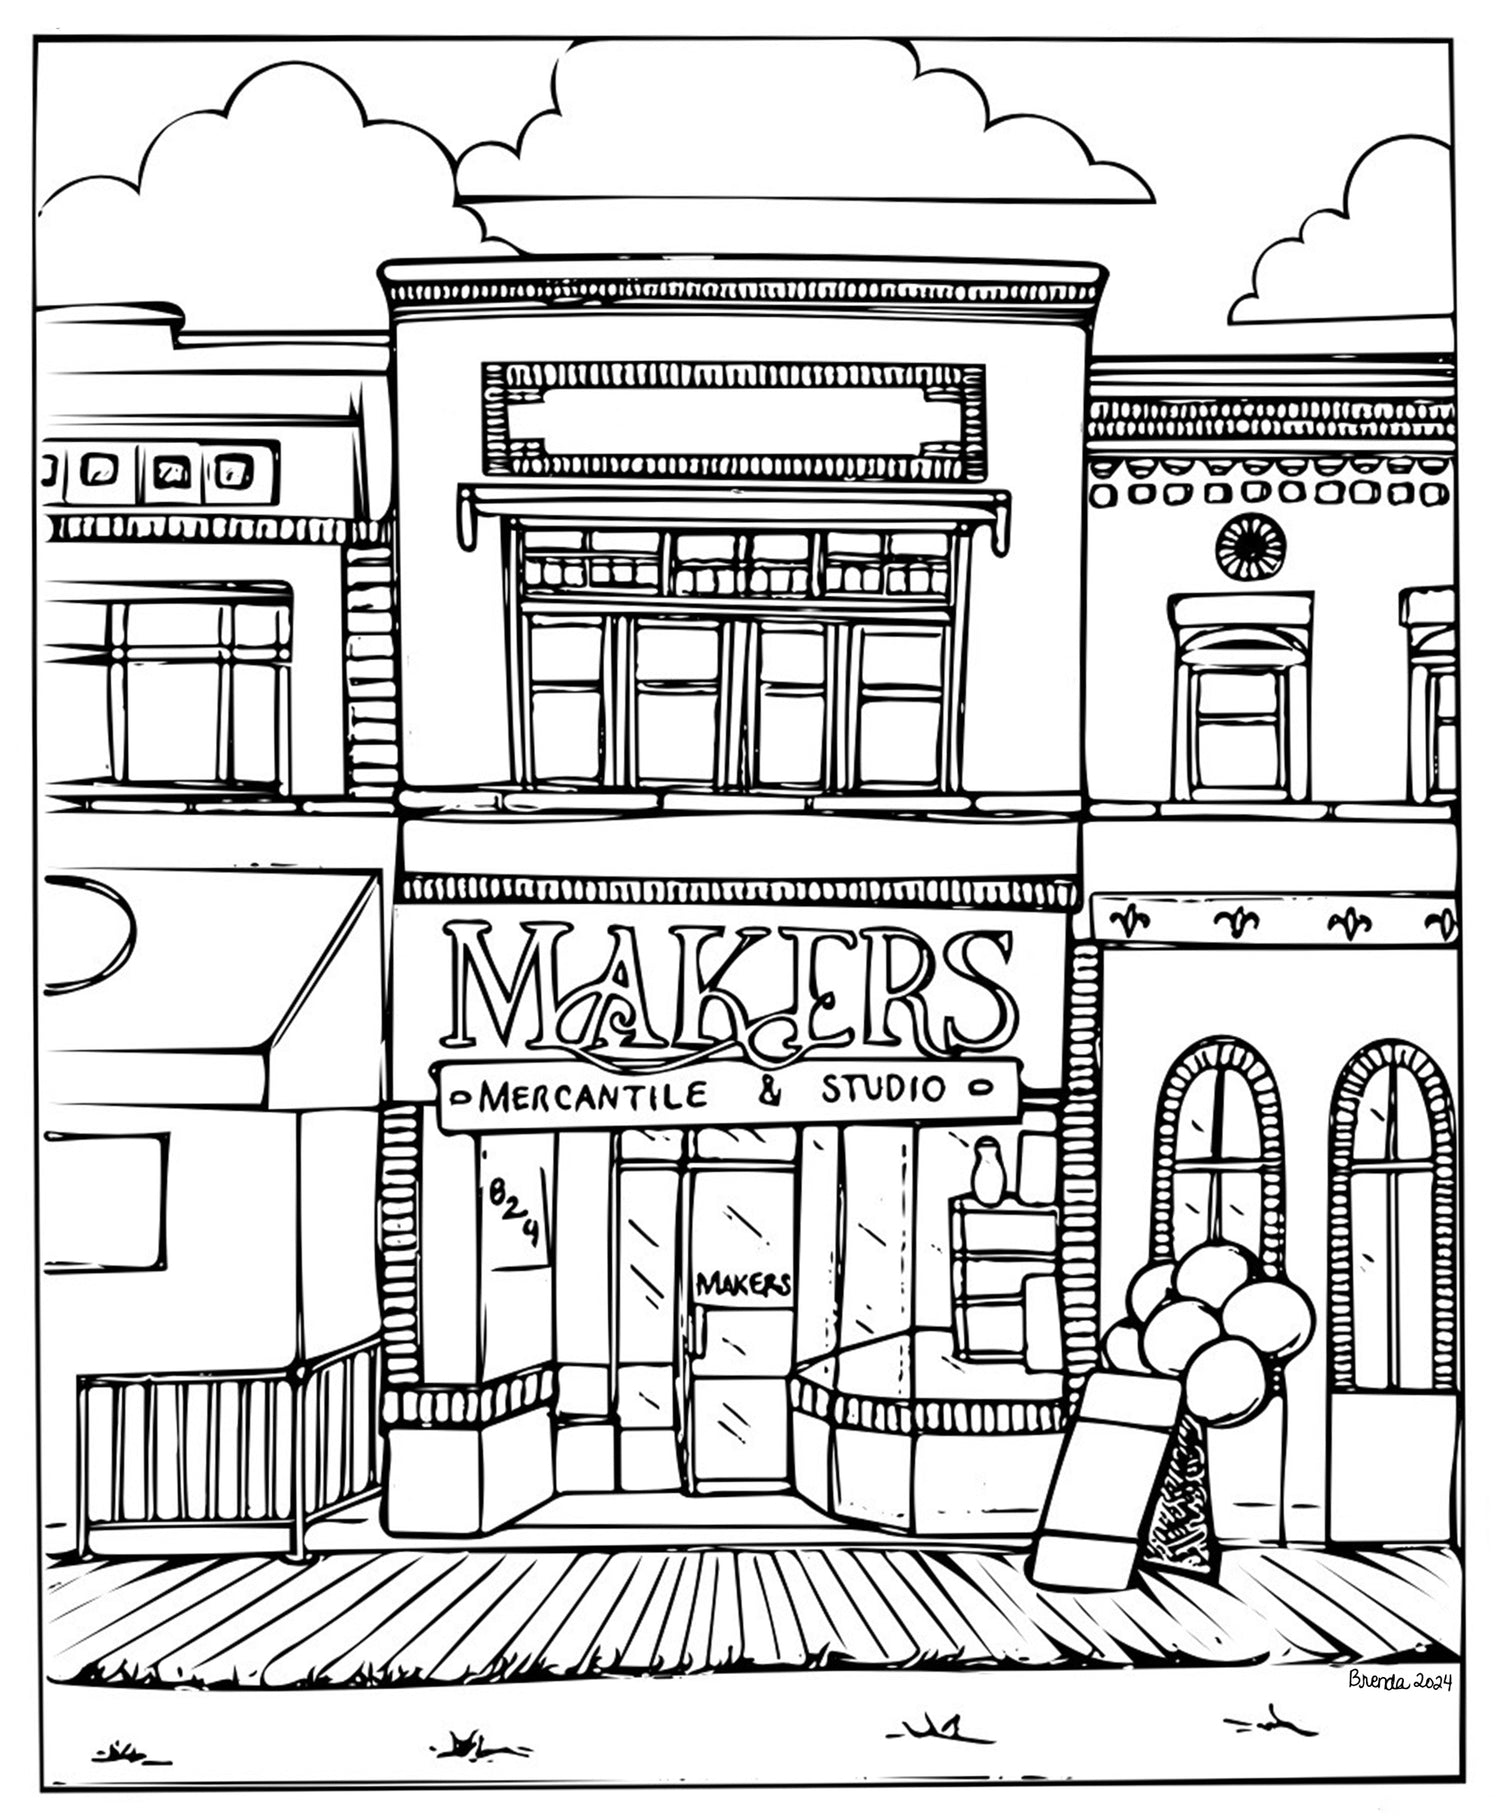 Black and white artists rendition of Makers Mercantile & Studio in Downtown Greeley